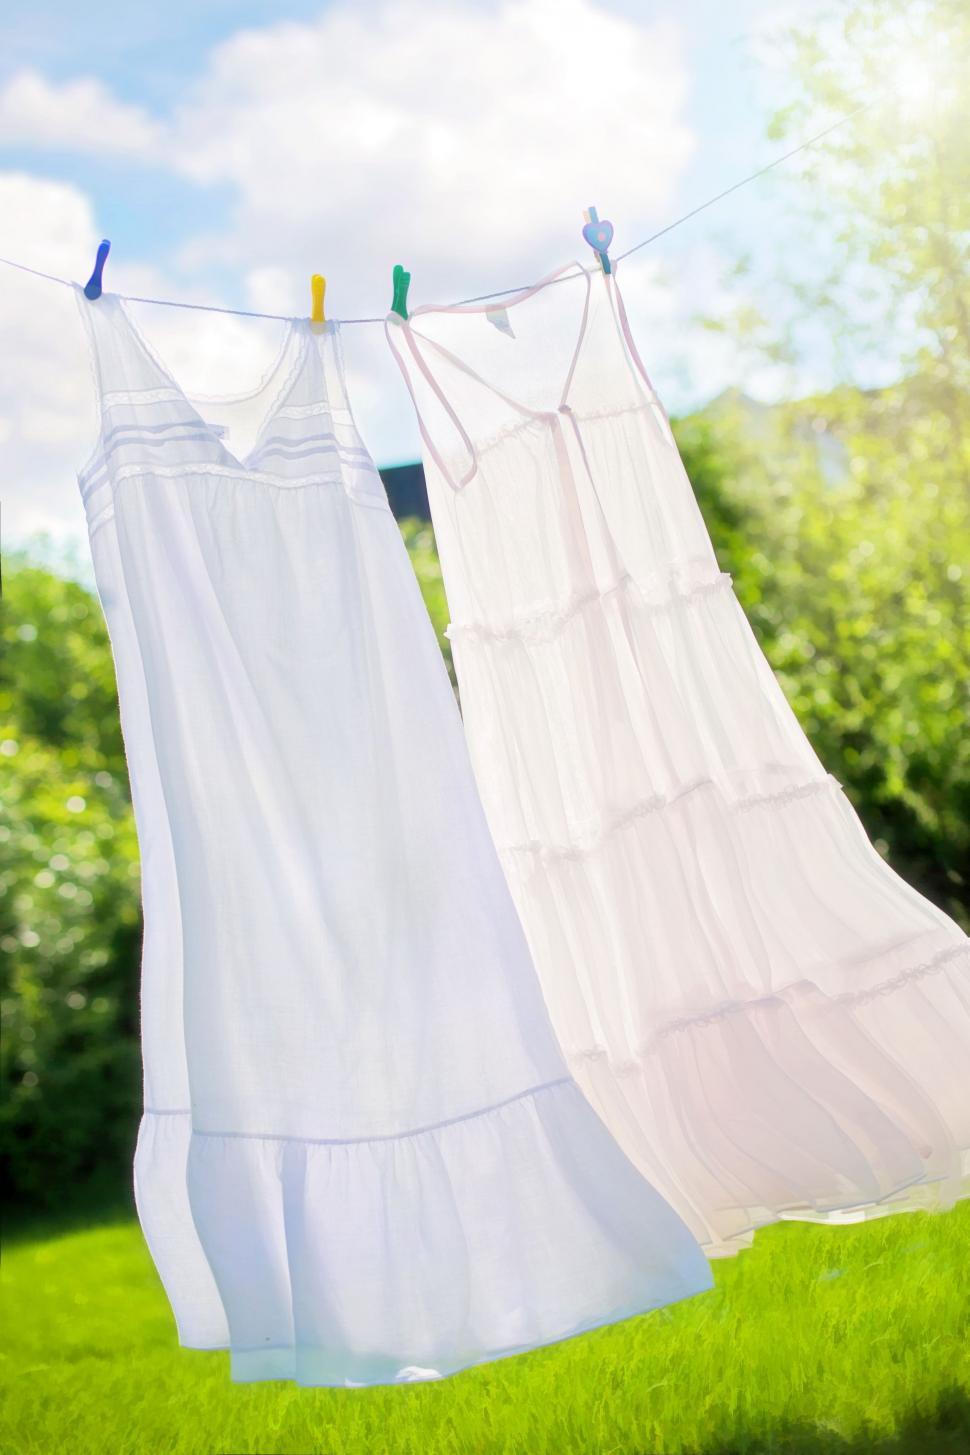 Free Image of Clothes hanging on the clothesline 